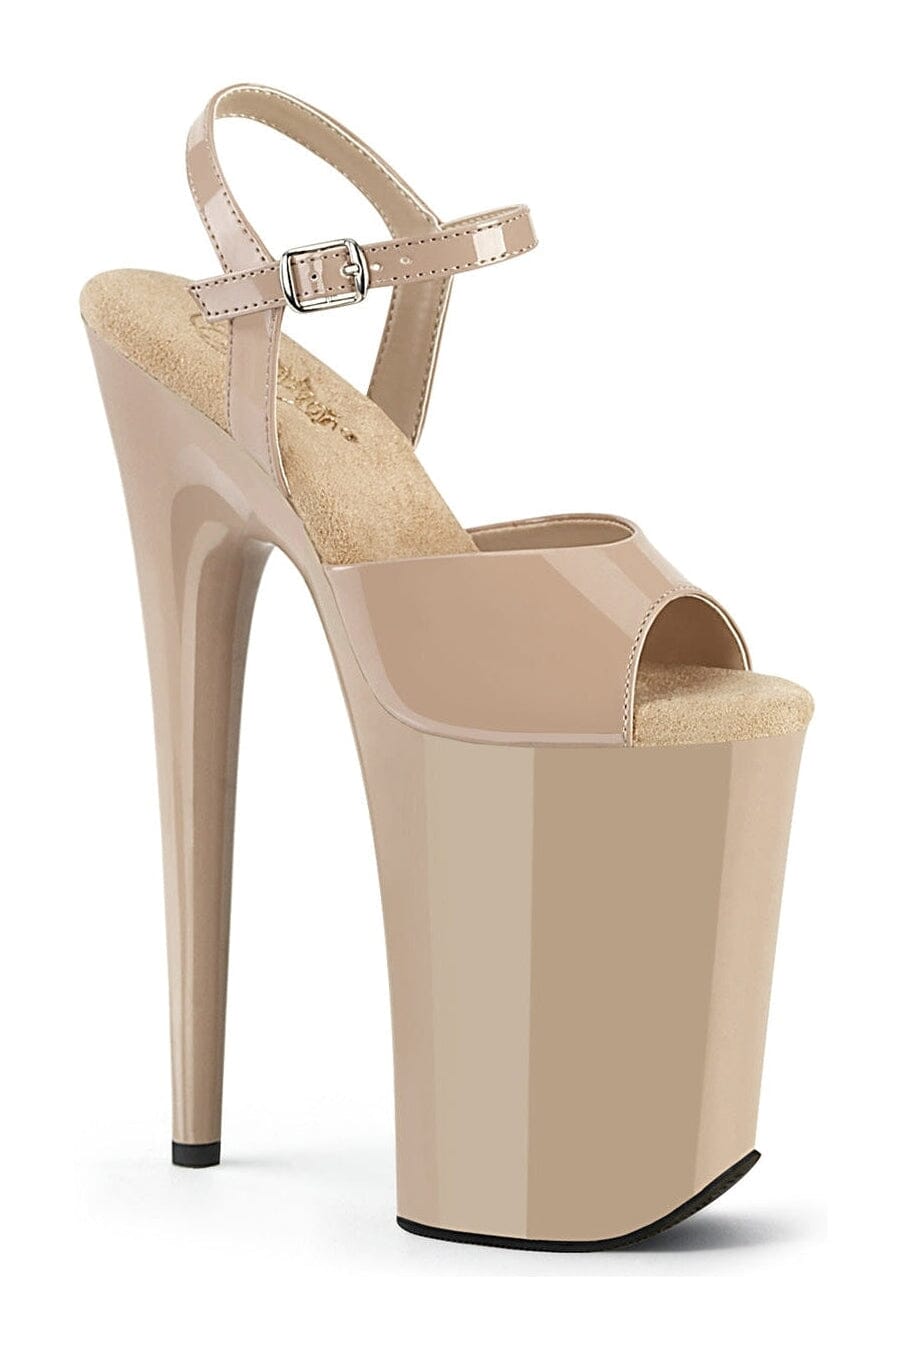 INFINITY-909 Nude Patent Sandal-Sandals- Stripper Shoes at SEXYSHOES.COM